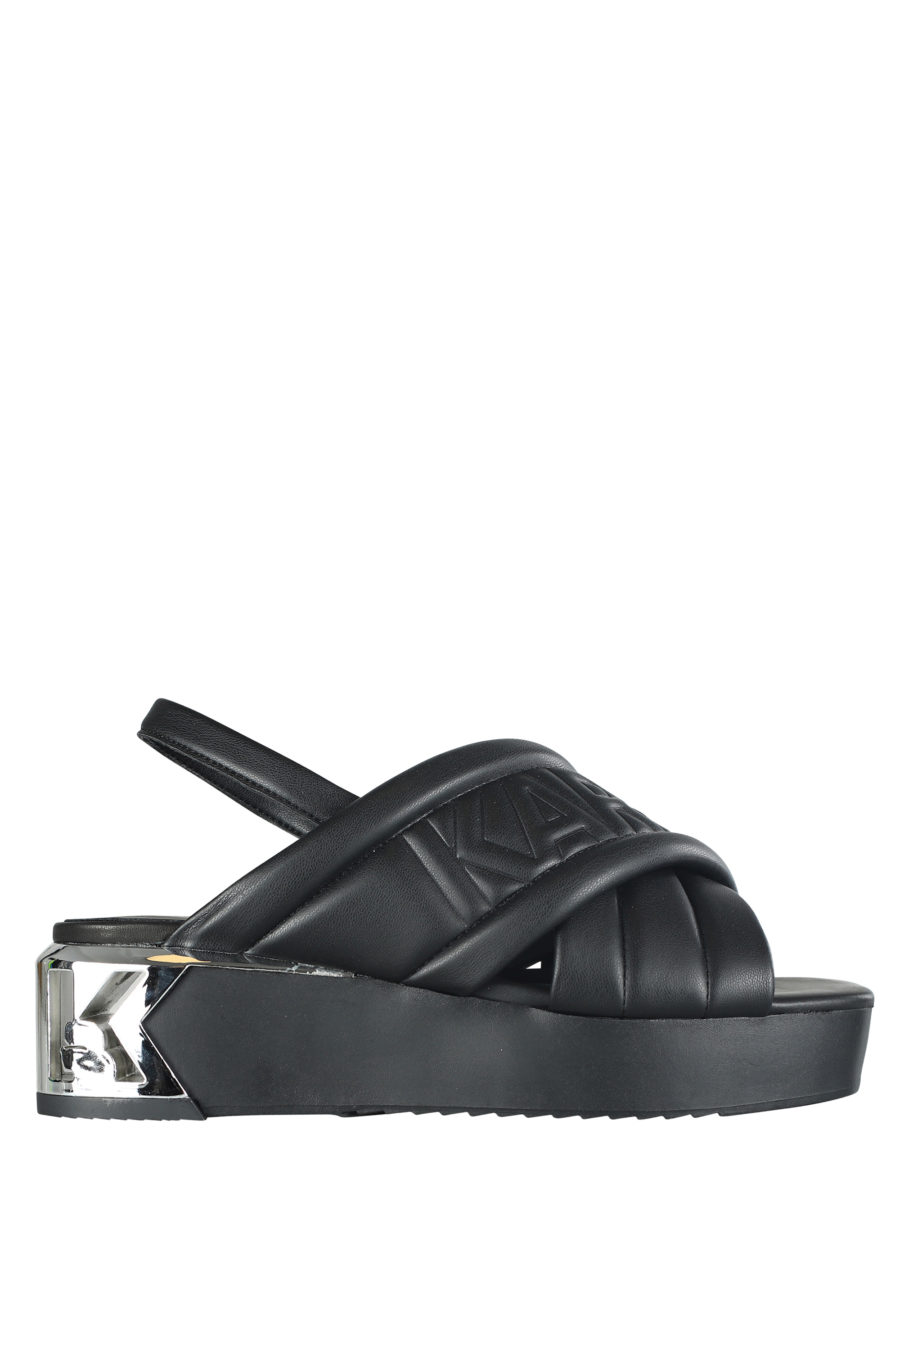 Black cushioned sandals with black logo and platform - IMG 5329